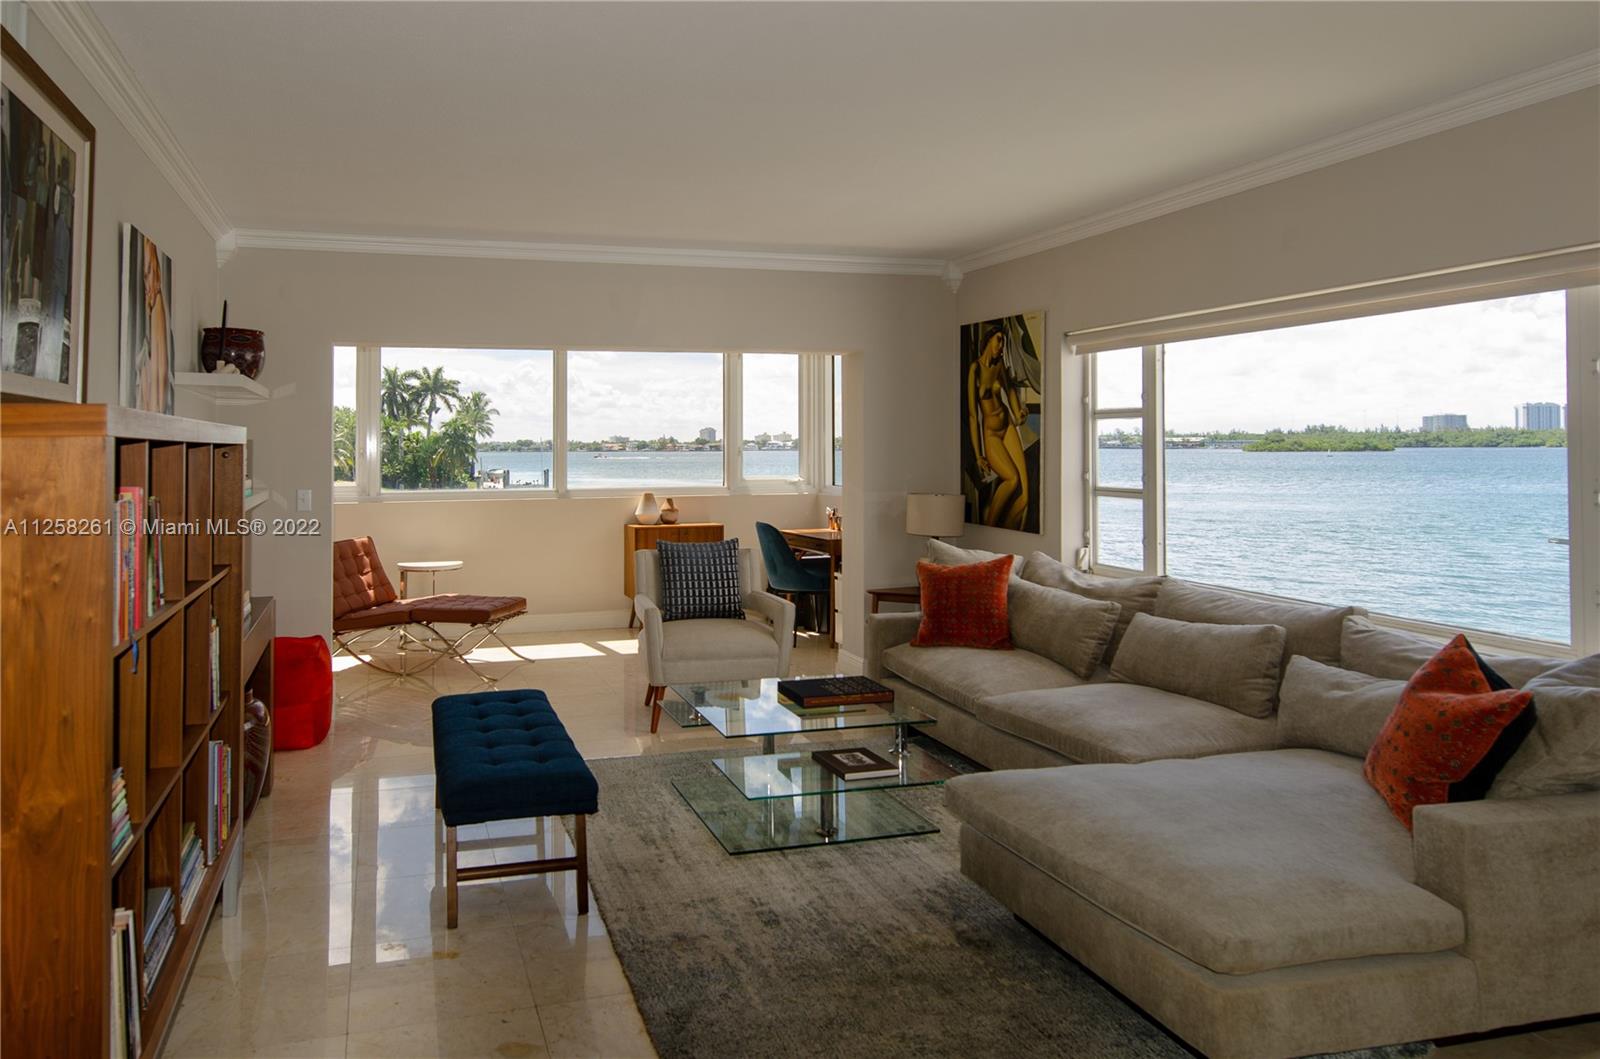 Apartment has Fabulous wide bay view from this corner unit with million $ homes at your feet across the canal while overlooking the wide bay and the yachts cruising on the Intracoastal. Feels like living on a boat. Completely remodeled including impact windows. Gorgeous state of the art kitchen with top-of-the-line stainless steel appliances. Marble floors throughout. The large pool is located right next to the dock at the end of the canal with the most beautiful view of the bay. West exposure with incredible sunsets. This is a co-op. Cash only. No rental allowed. No pets. Walk to the beach and the world-famous luxury Bal Harbor shops!
Stunning unit..